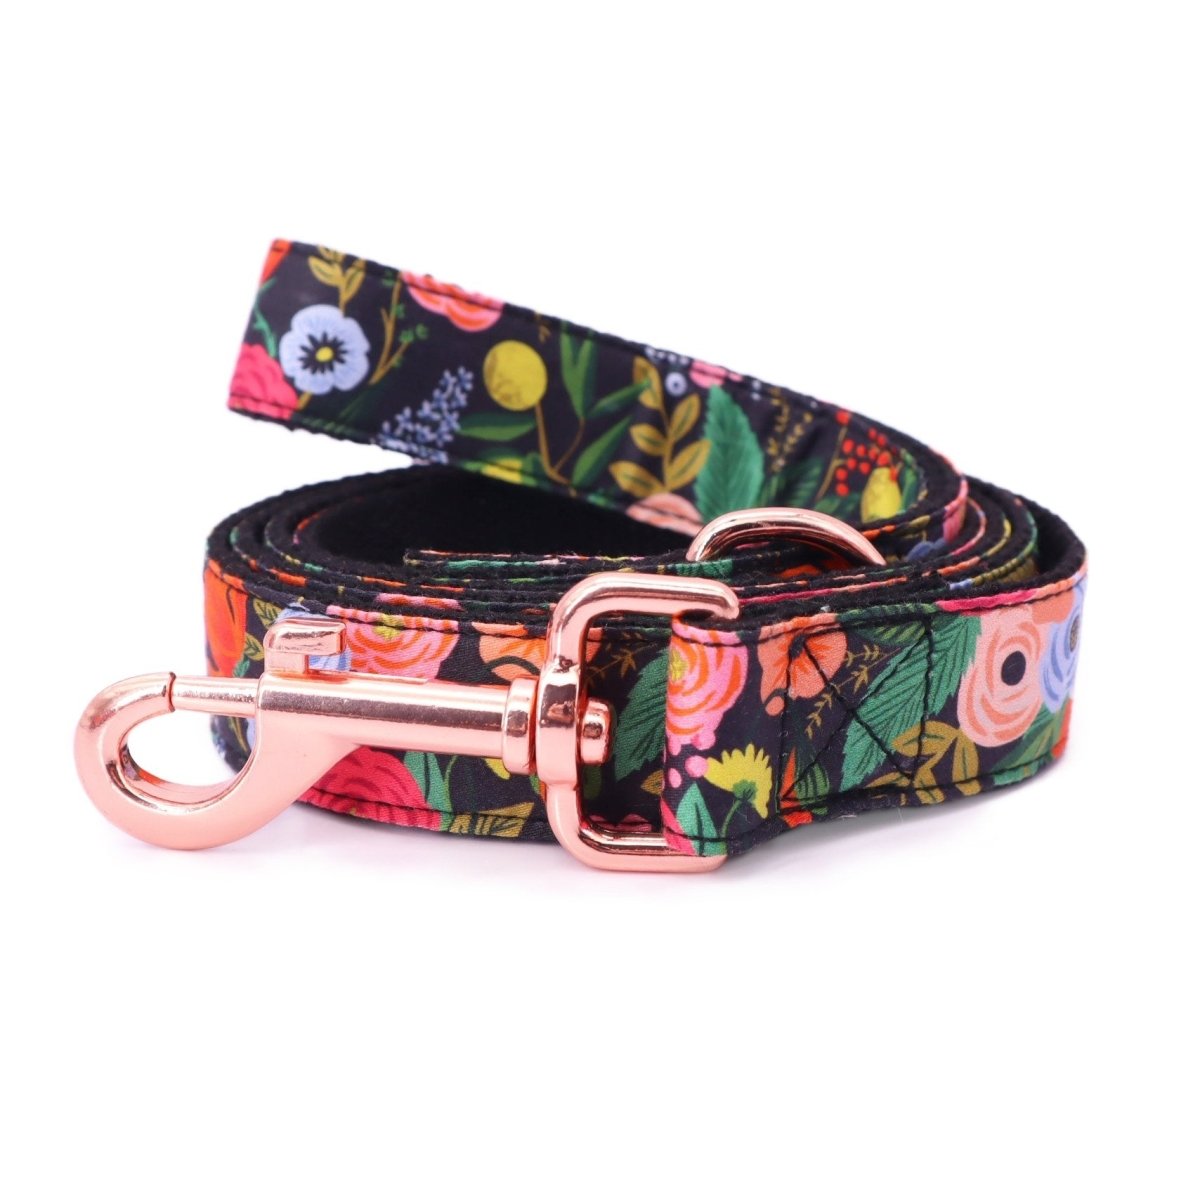 Cute & Safe Heavy Duty Dog Leash with Secure Hook. Adorable